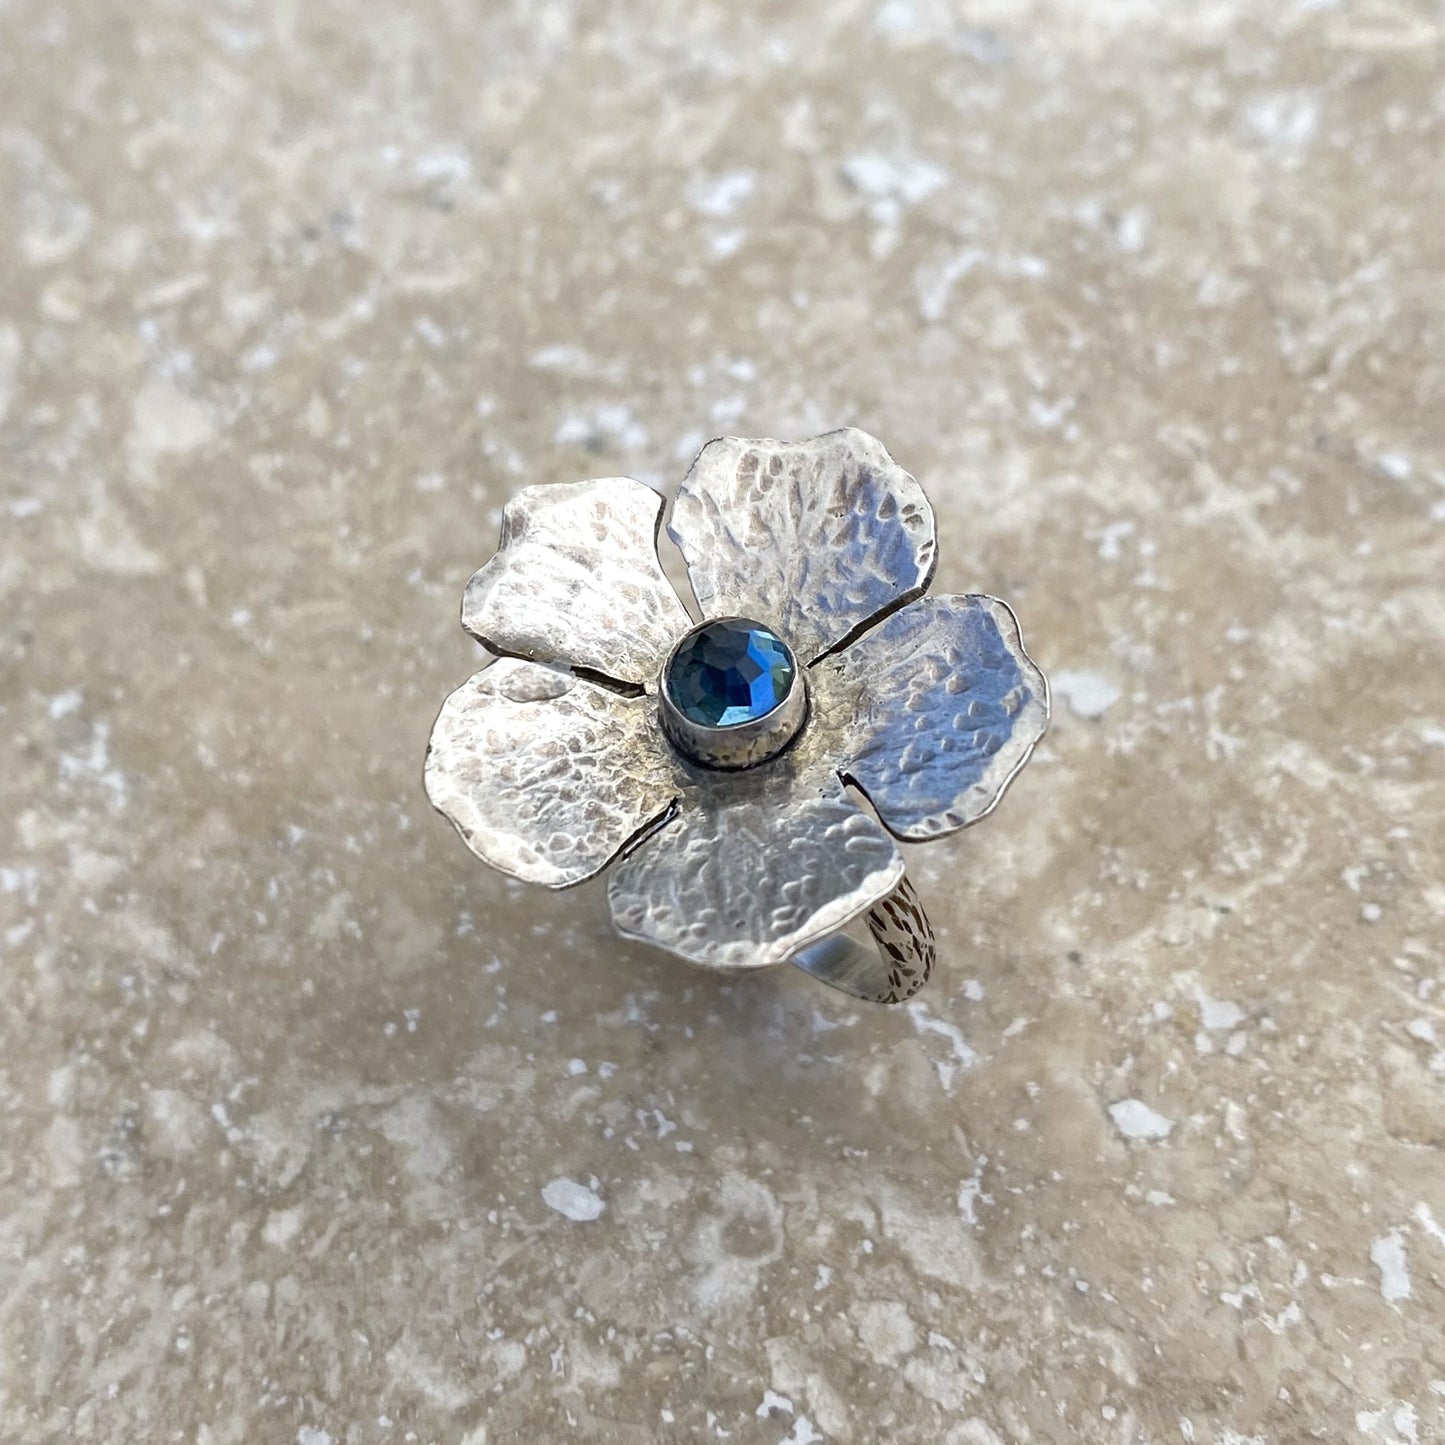 Handmade Blue Topaz Flower Hand-Pierced Sterling Silver Ring - Size 6.5 by Cara Carter Jewelry